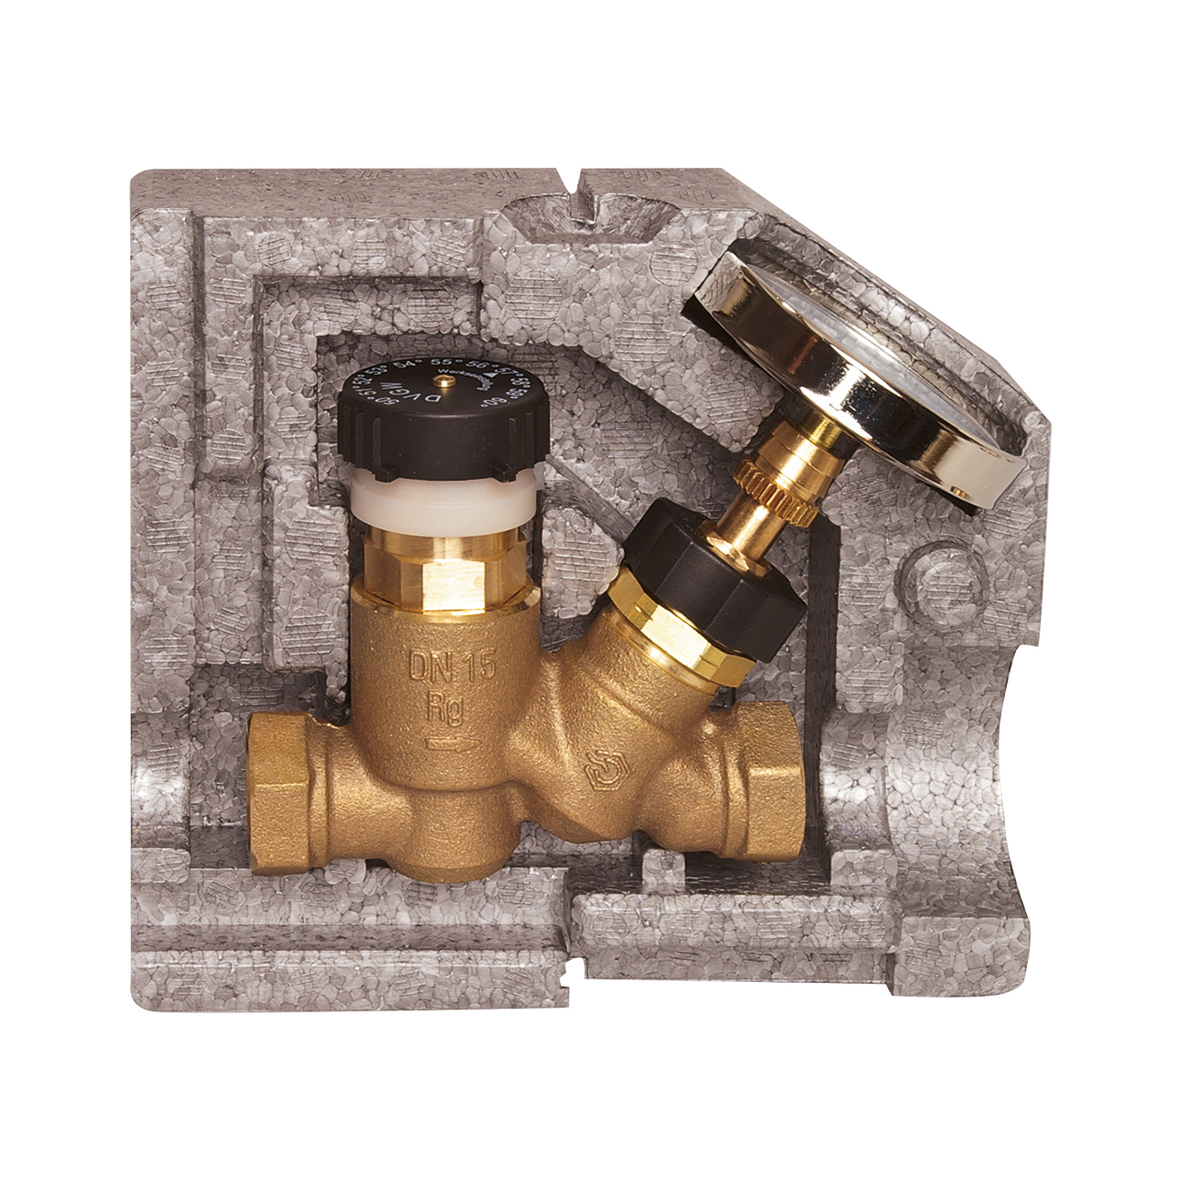 NexusValve TW - Domestic water circulation valves with insulation and female thread